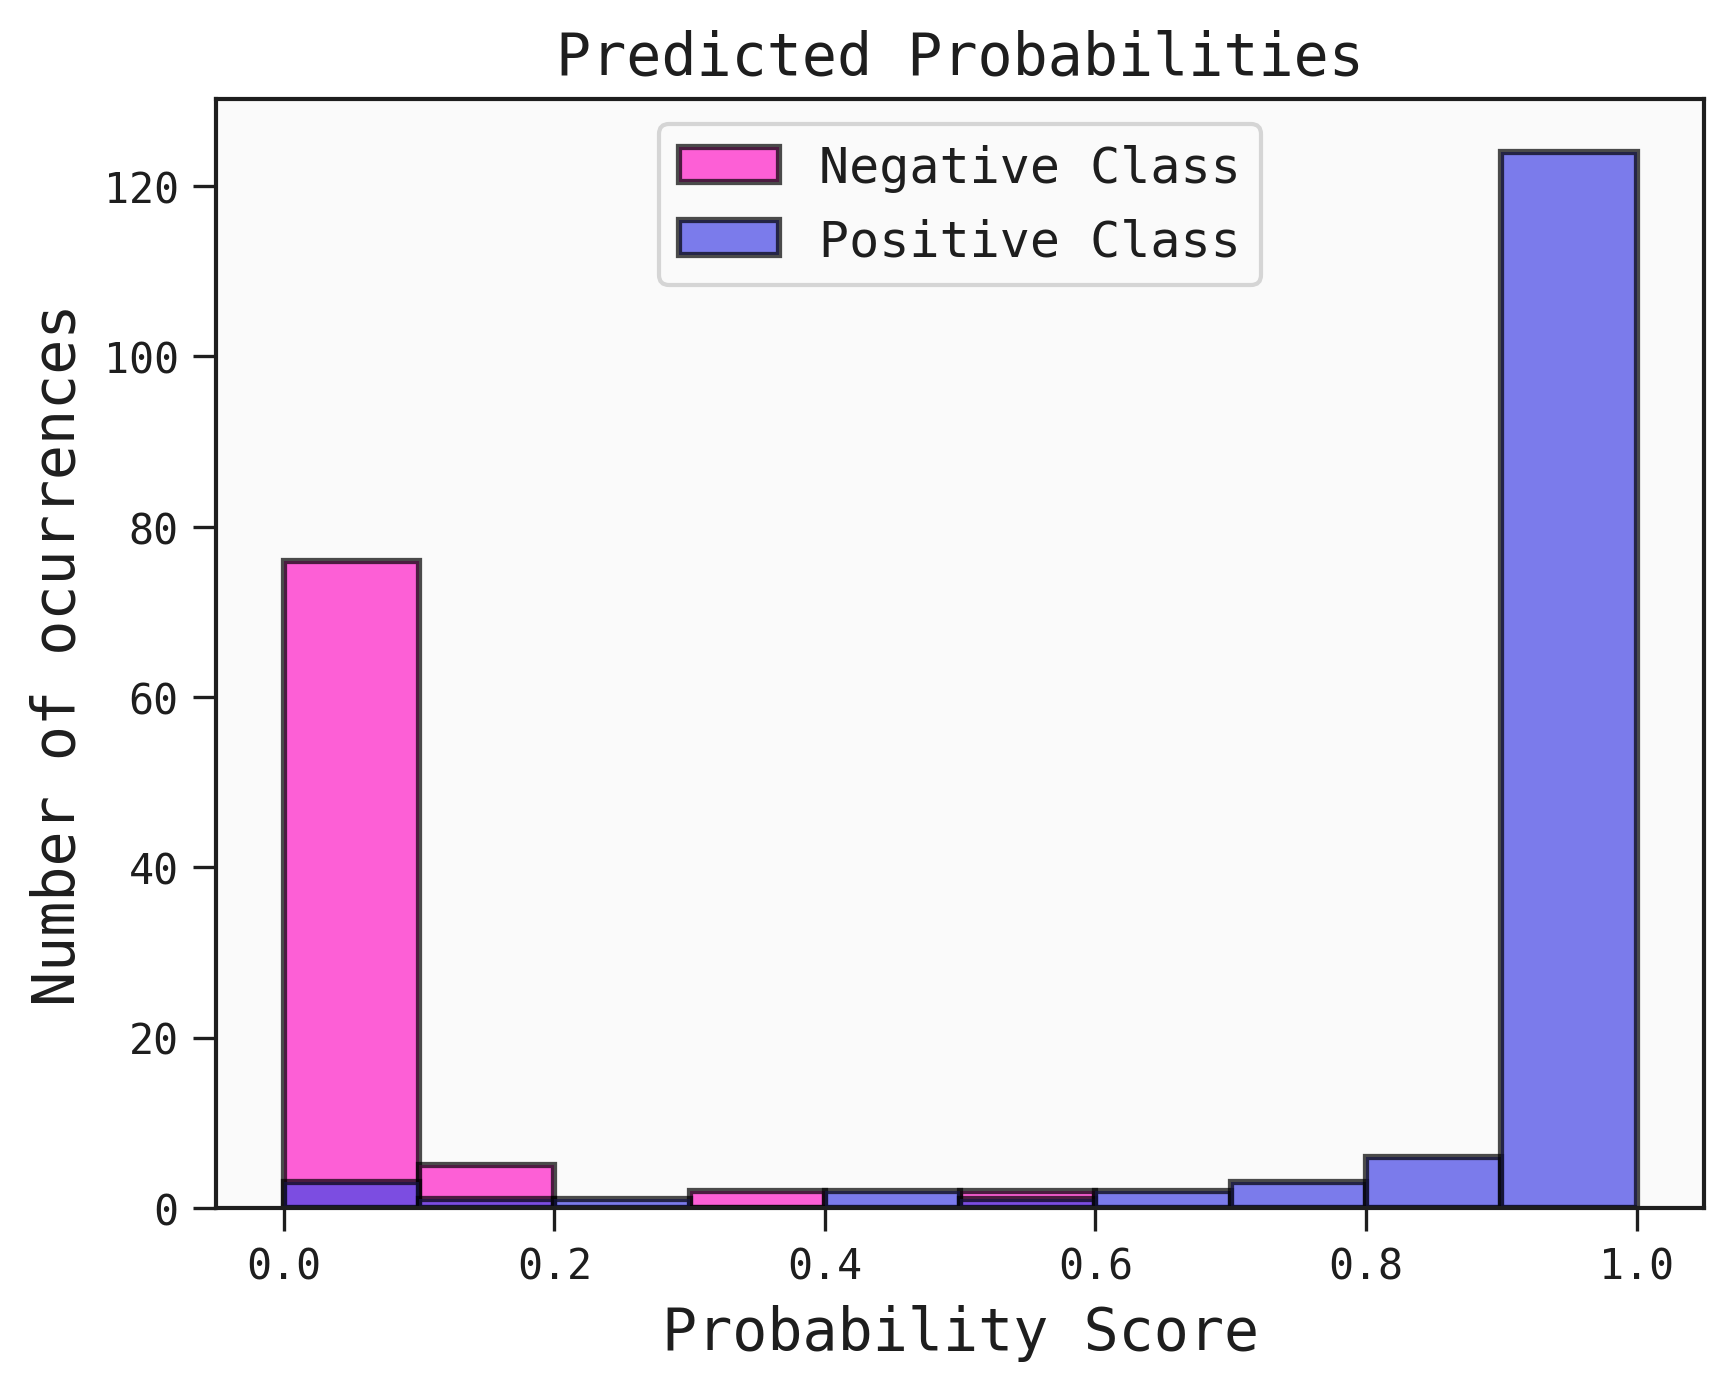 Plot showing the binned probability scores for the predictions